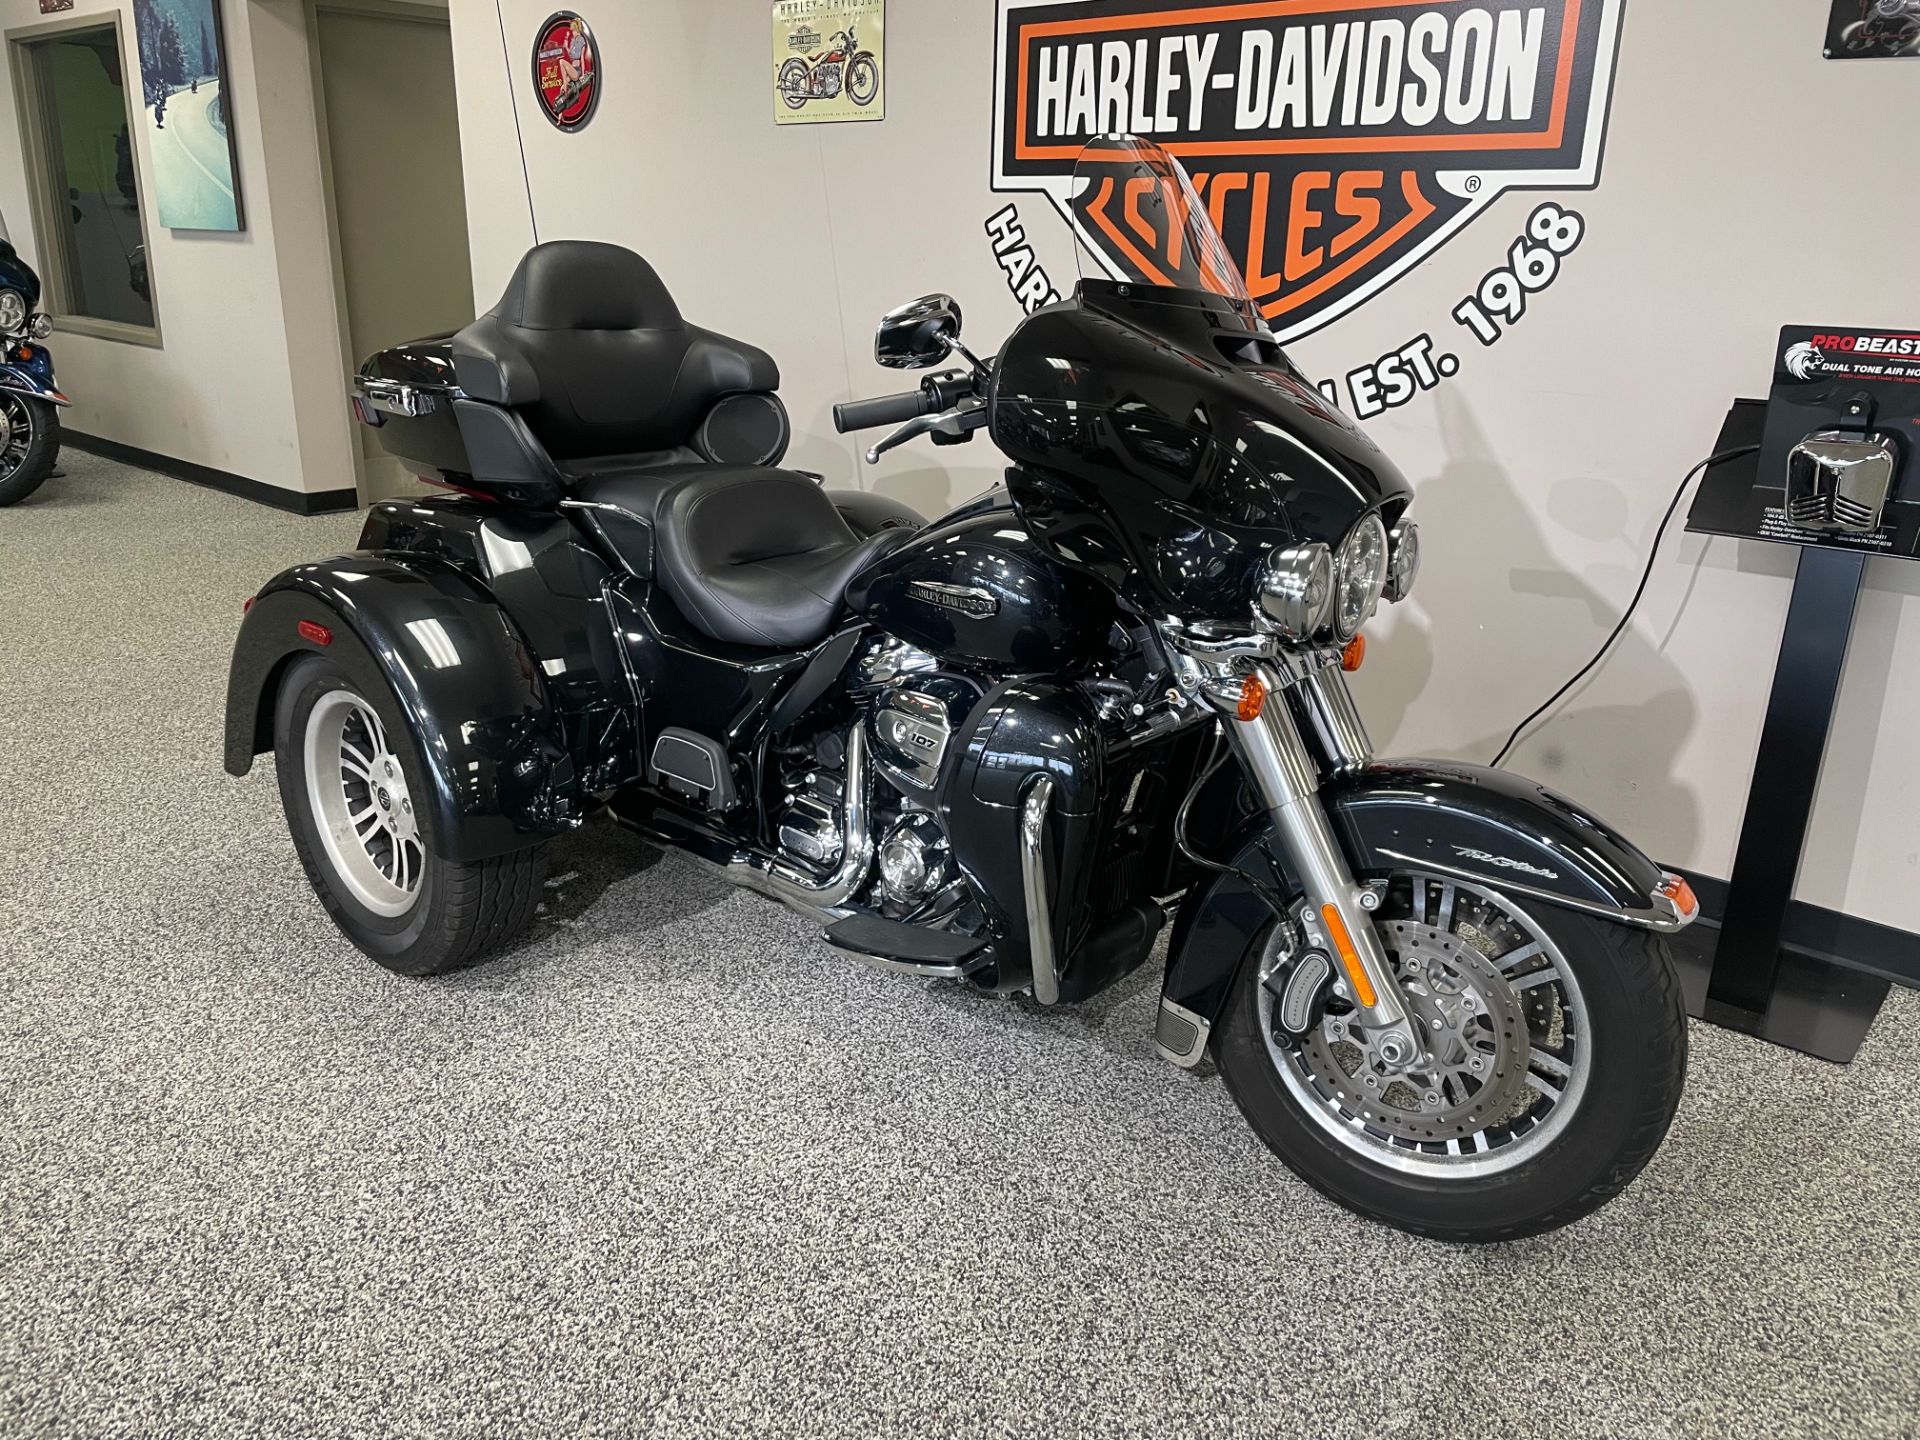 2018 Harley-Davidson TRI-GLIDE ULTRA CLASSIC in Knoxville, Tennessee - Photo 4